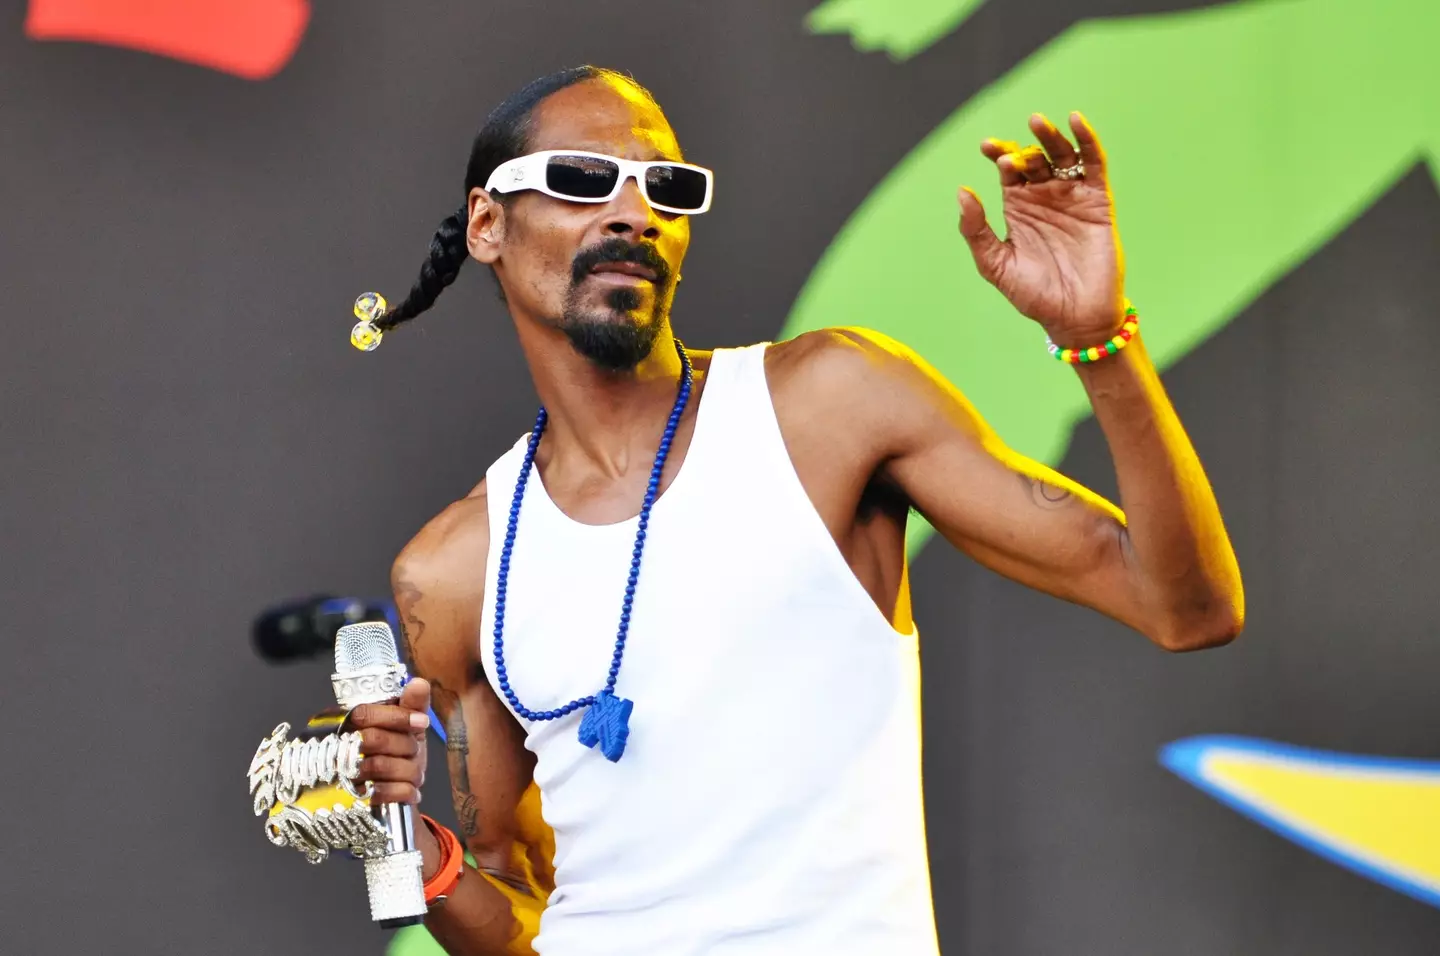 Snoop Dogg stands by his lyrics.